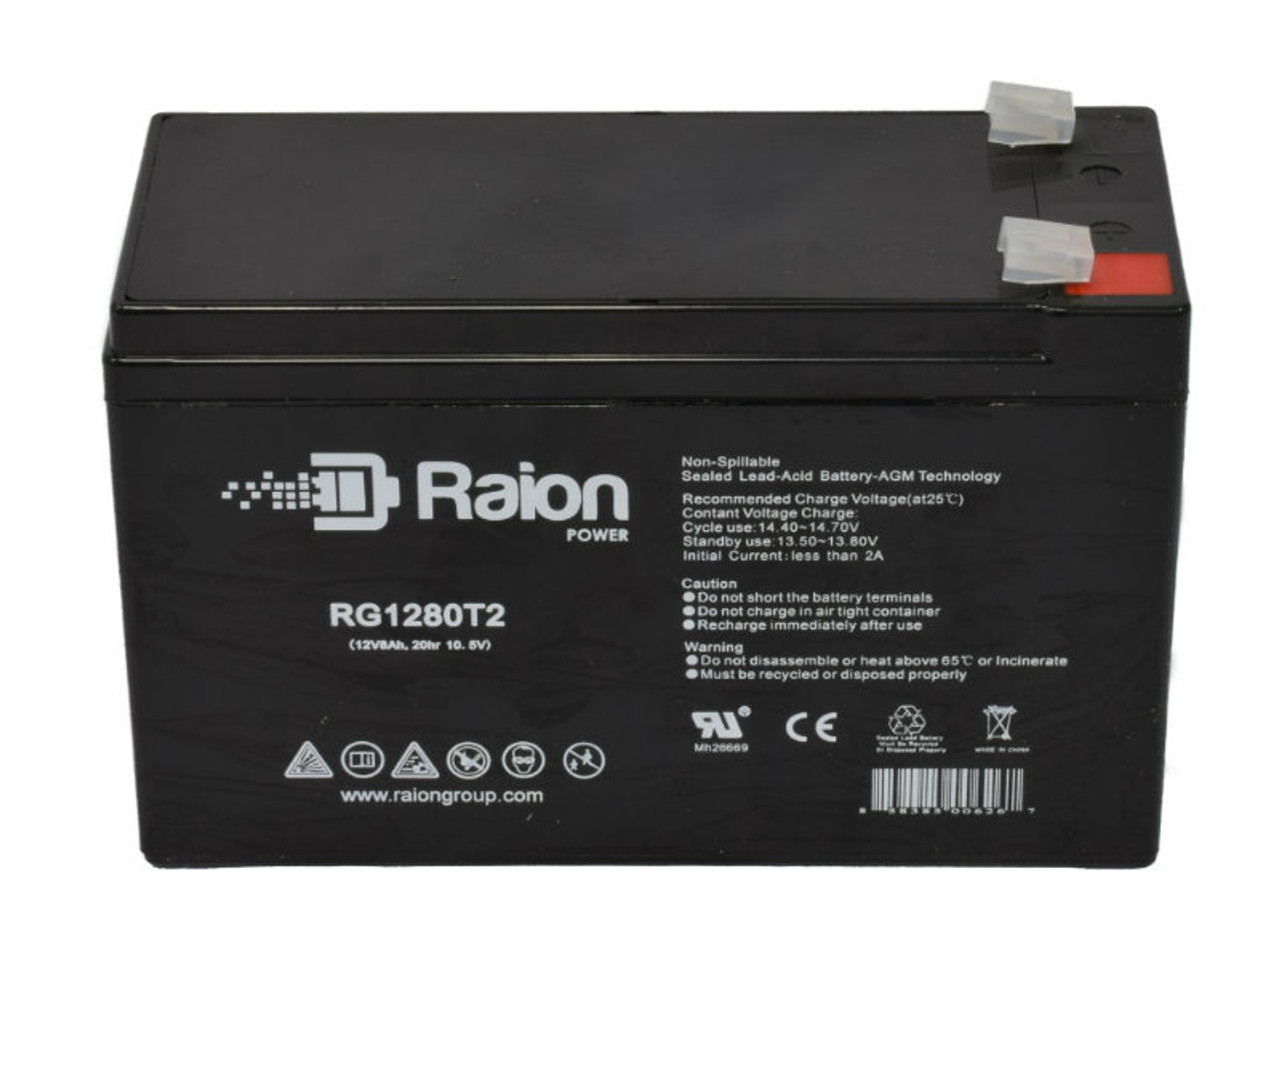 Raion Power Replacement 12V 8Ah Battery for Sunforce 77760 10 Million Candle Power Spotlight - 1 Pack